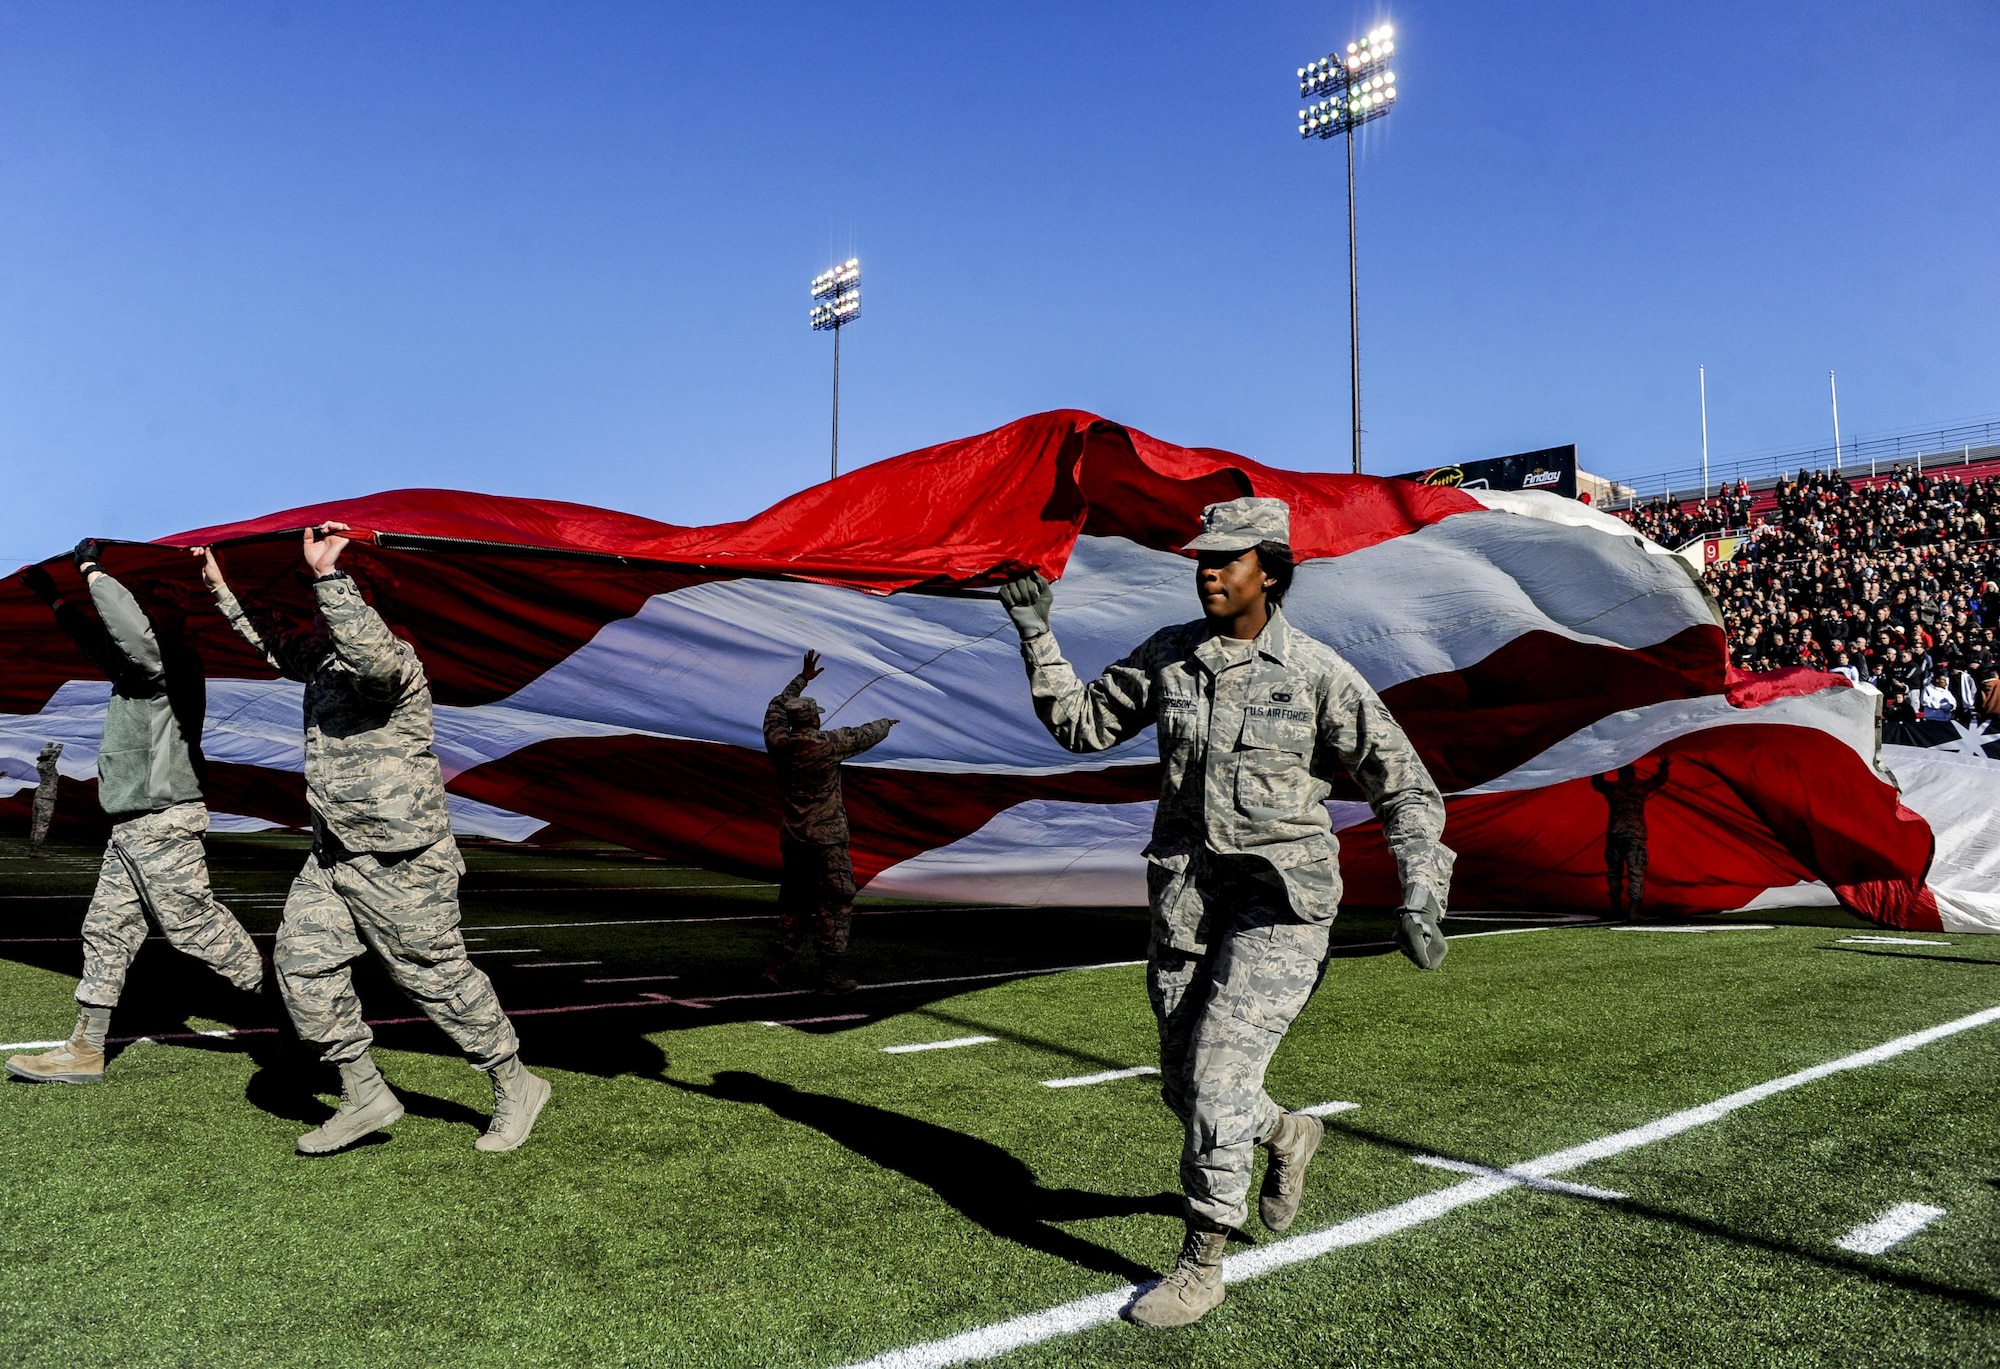 Airmen from Nellis and Creech Air Force Bases unveil the American Flag at Sam Boyd Stadium during the Las Vegas Bowl, Dec. 17, 2016. San Diego State senior Donnel Pumphrey earned the Rossi T. Ralenkotter Most Valuable Player Trophy by rushing for 115 yards on 19 carries during the game. (U.S. Air Force photo by Airman 1st Class Kevin Tanenbaum/Released)